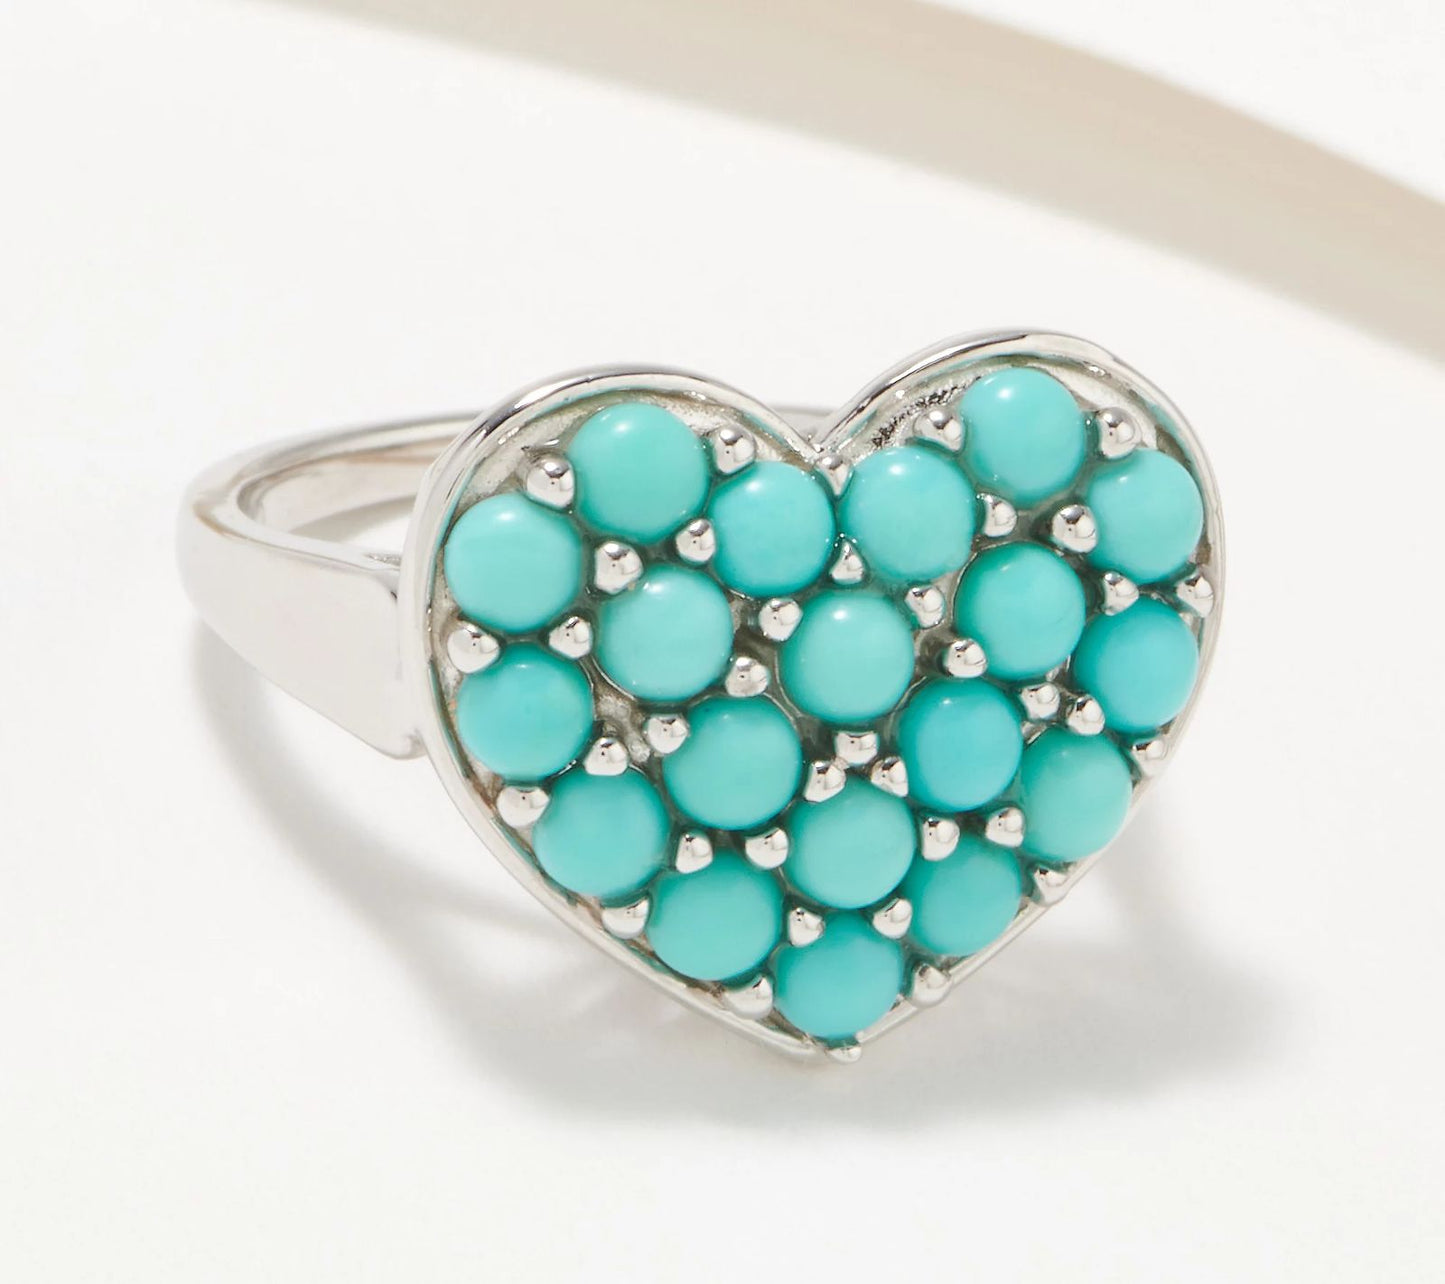 Affinity Gems Sleeping Beauty Turquoise Heart Shape Ring Size 9 Sterling Silver